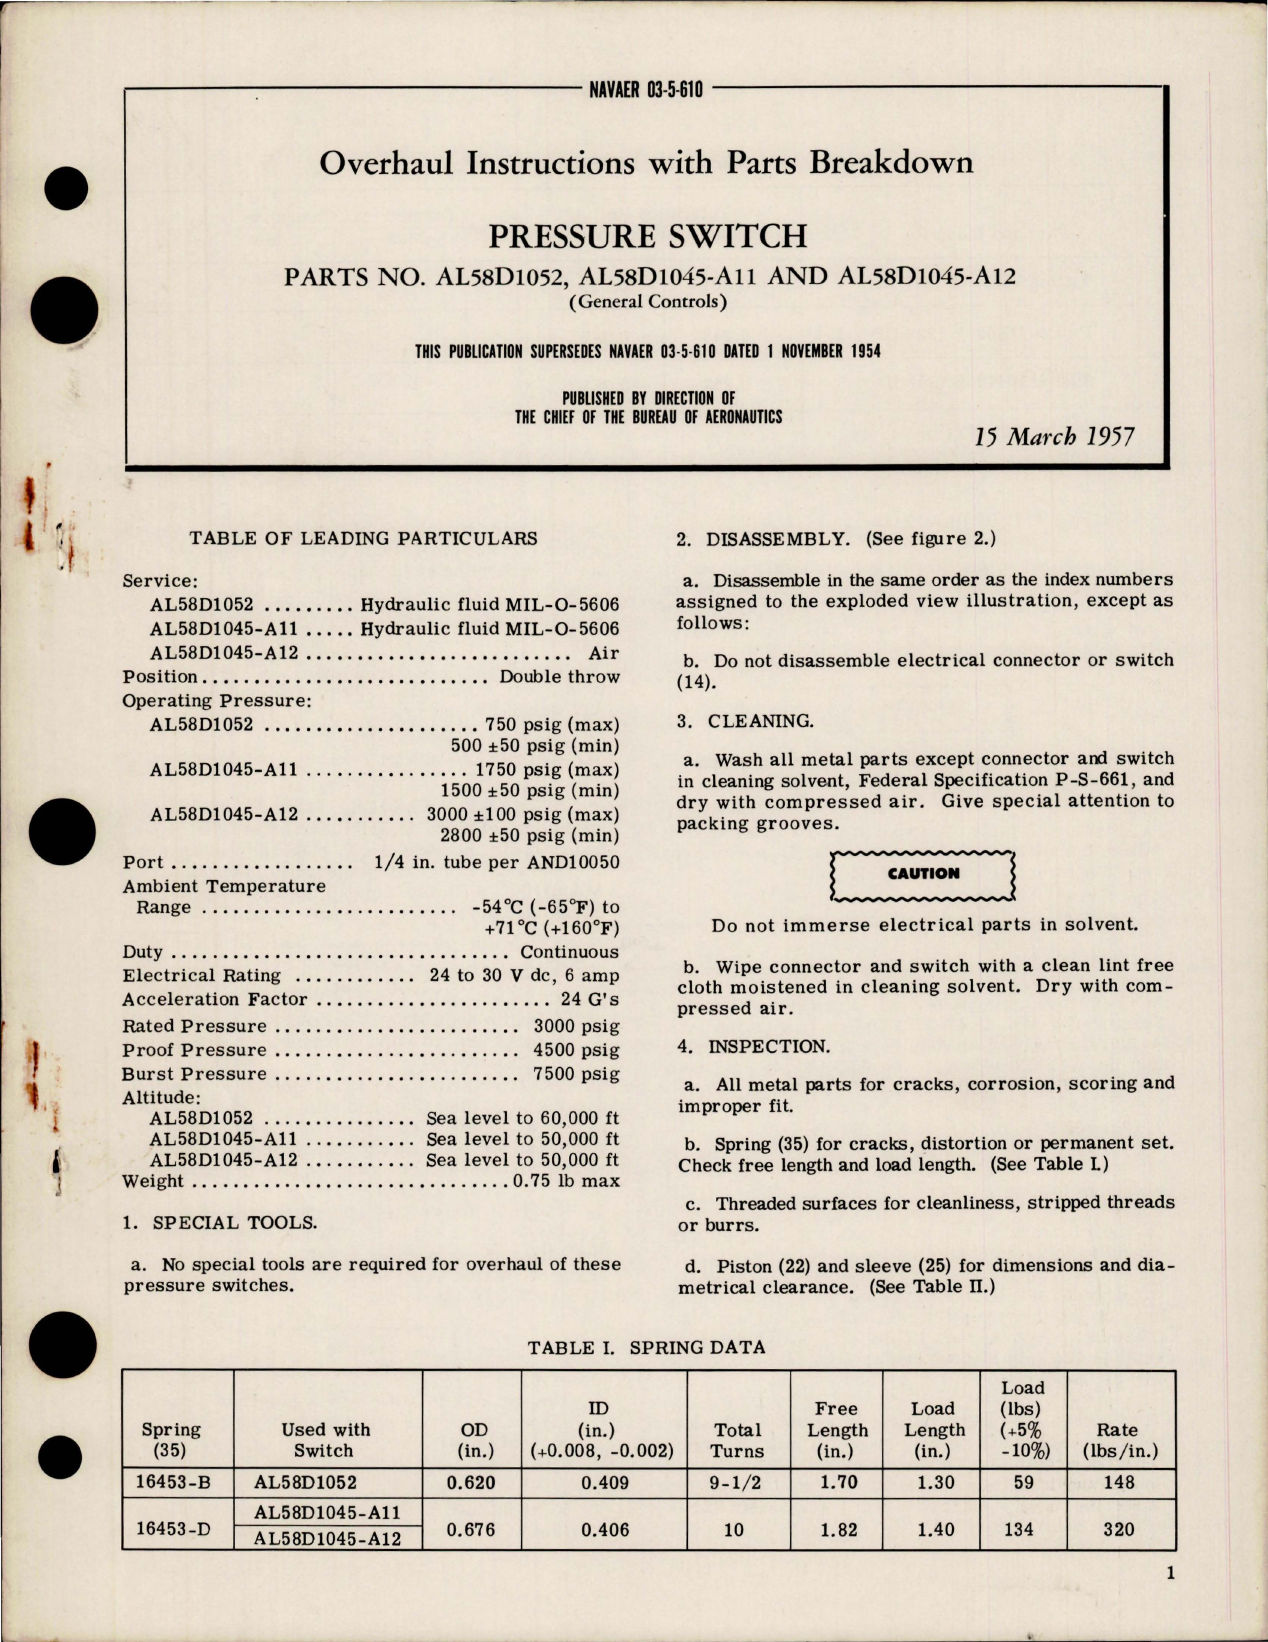 Sample page 1 from AirCorps Library document: Overhaul Instructions with Parts for Pressure Switch - Parts AL58D1052, AL58D1045-A11 and AL58D1045-A12 